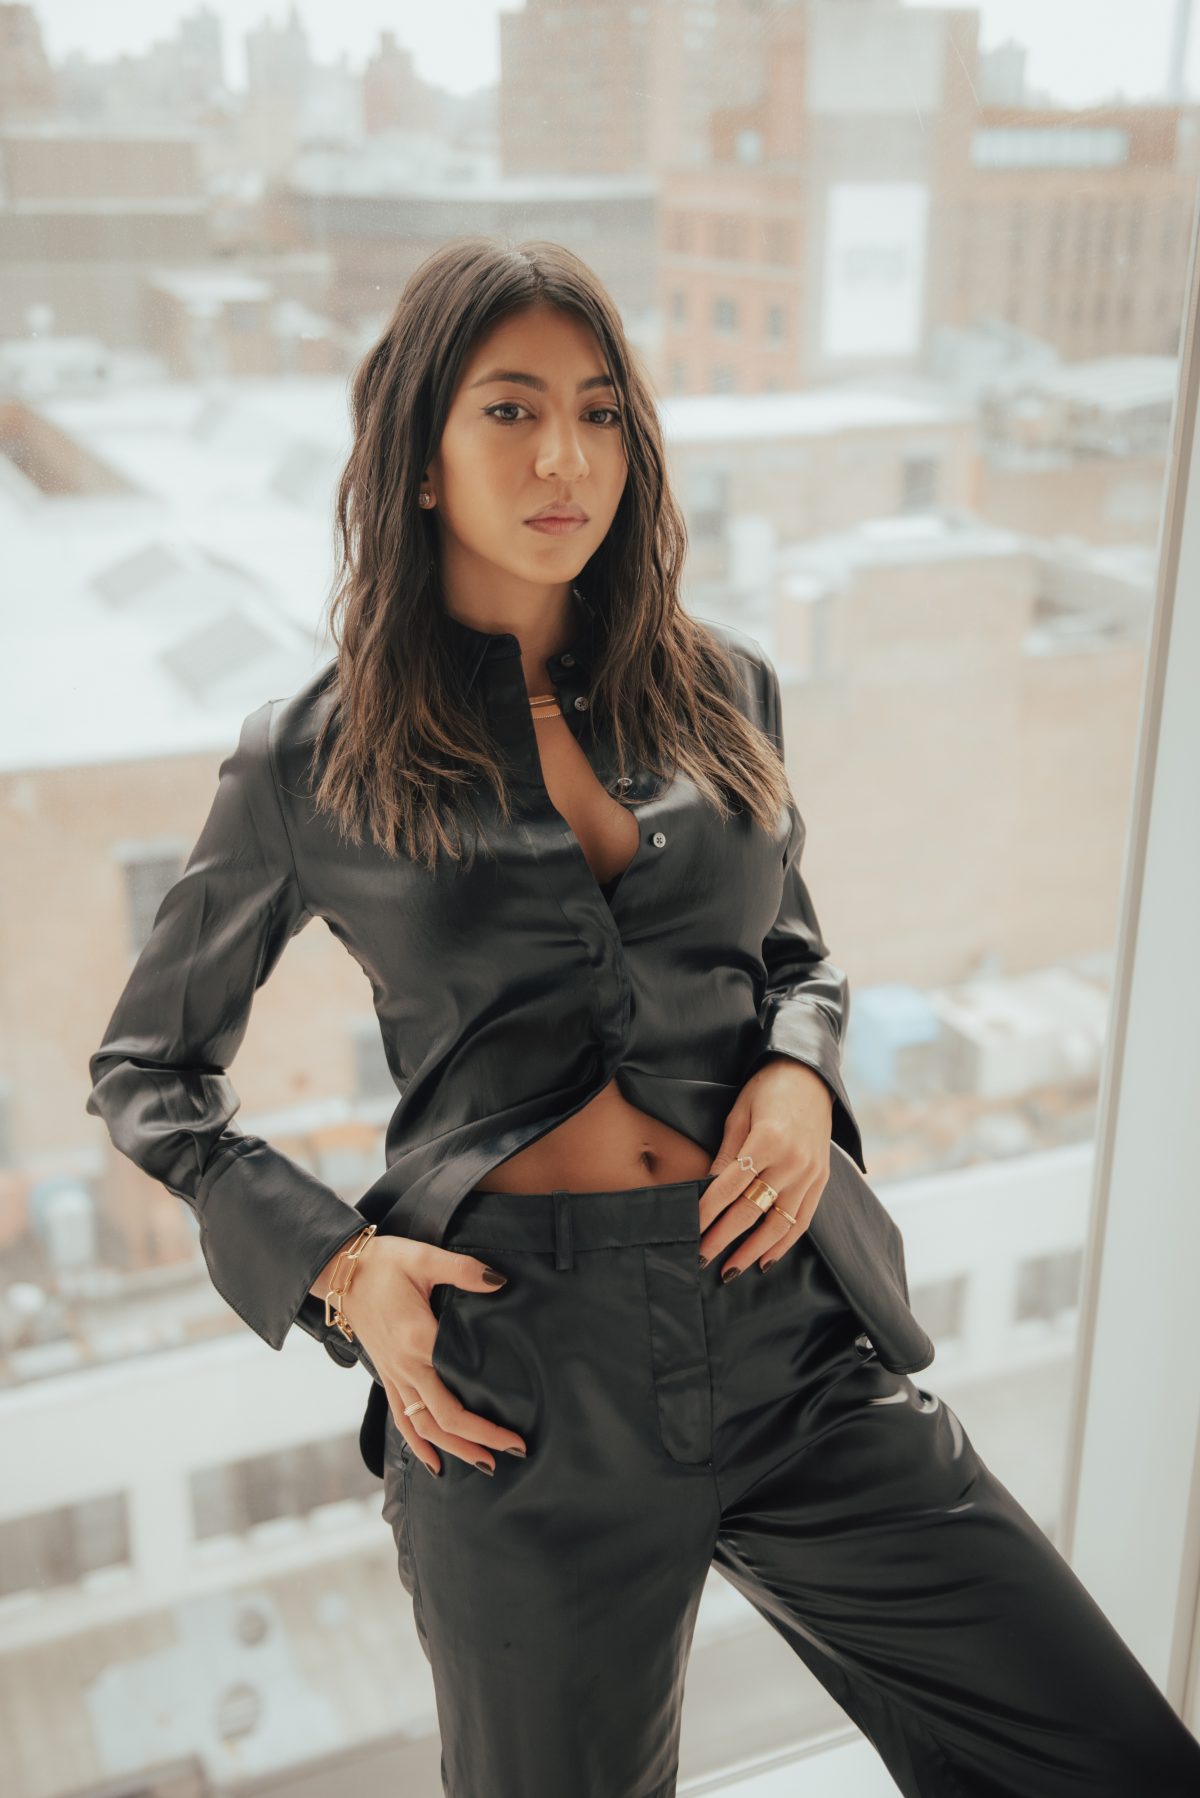 nyfw far fetch 3.1 phillip lim trousers the standard hotel new york city fashion blogger blog kayla seah streetstyle navy trousers pants fashion style